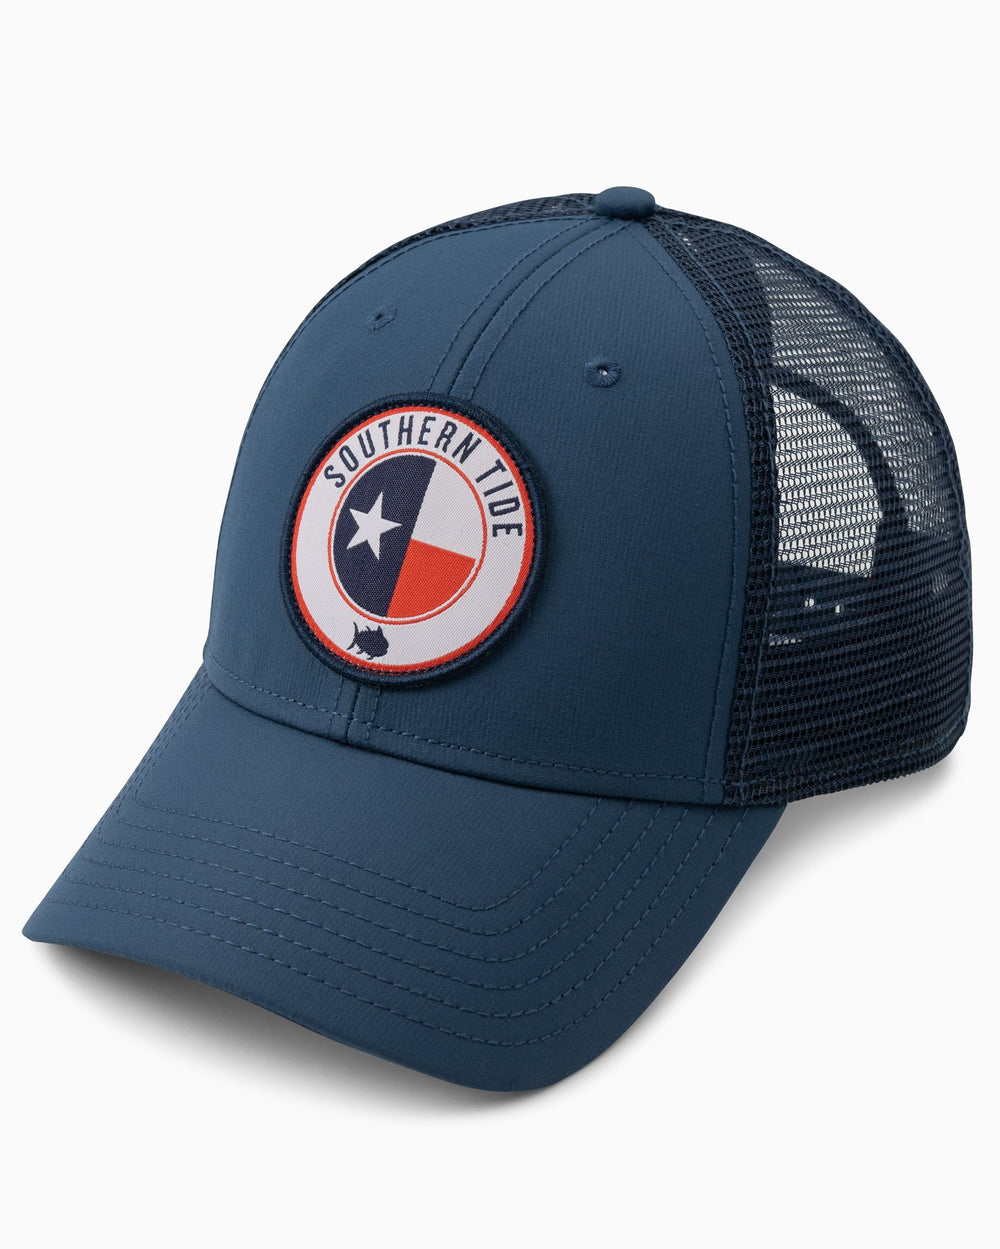 The front view of the Men's Texas Patch Performance Trucker Hat by Southern Tide - Seven Seas Blue